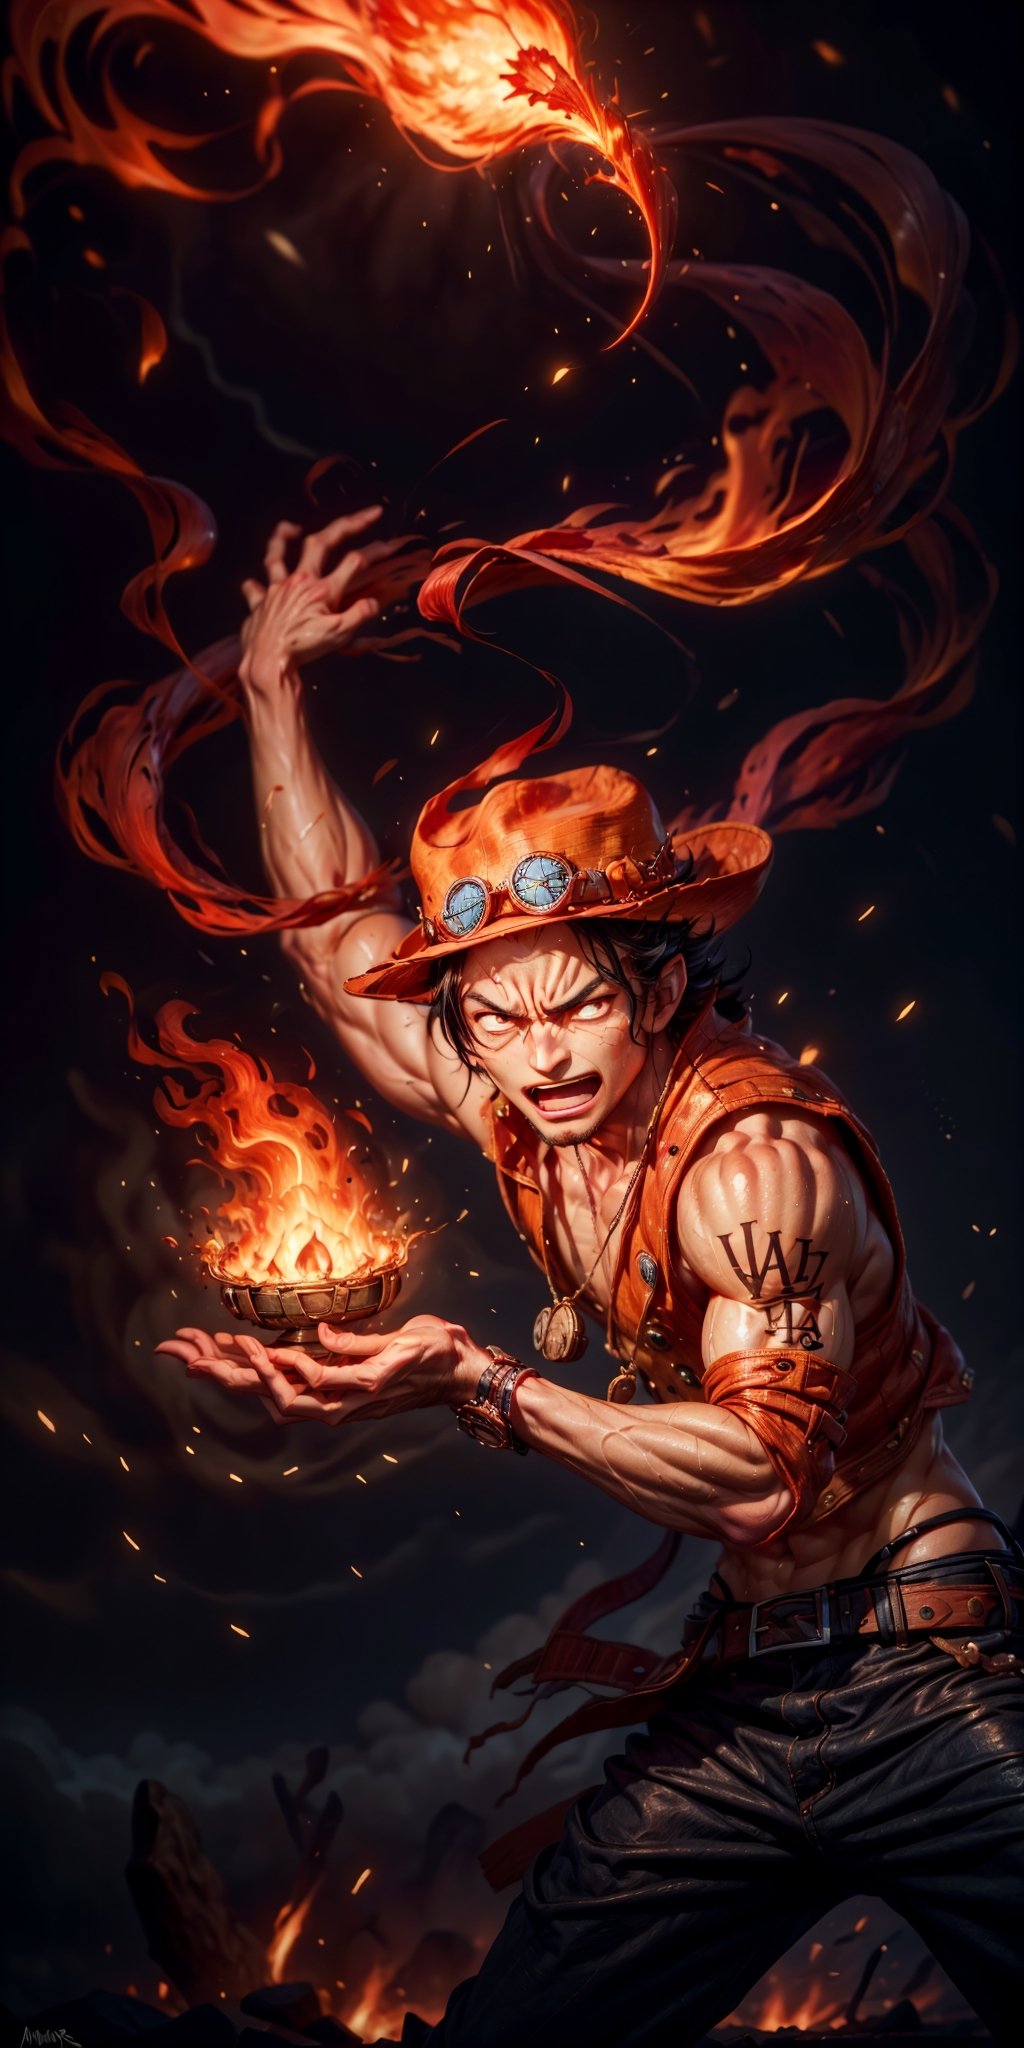 Create the iconic One Piece character, Portgas D. Ace:

"Visualize the legendary Portgas D. Ace, a prominent character from the One Piece anime. He possesses a lithe and muscular physique, reflecting his formidable strength.

Ace is clad in his signature attire, wearing a stylish hat that adds to his iconic appearance. His defining ability is his mastery over fire, and his hands should be ablaze with flickering flames, showcasing his power to manipulate fire at will.

Set him against a background of raging fire, with flames dancing in the backdrop, creating an inferno-like atmosphere. The flames should emphasize his fiery abilities and his unwavering resolve.

Capture this image to pay homage to Portgas D. Ace's character, showcasing his powerful presence and his association with the element of fire, a central theme in his story arc within the One Piece series." ((Perfect face)), ((perfect hands)), ((perfect body)), [perfect image of Portgas D. Ace(one piece anime character)],perfecteyes,Elemental